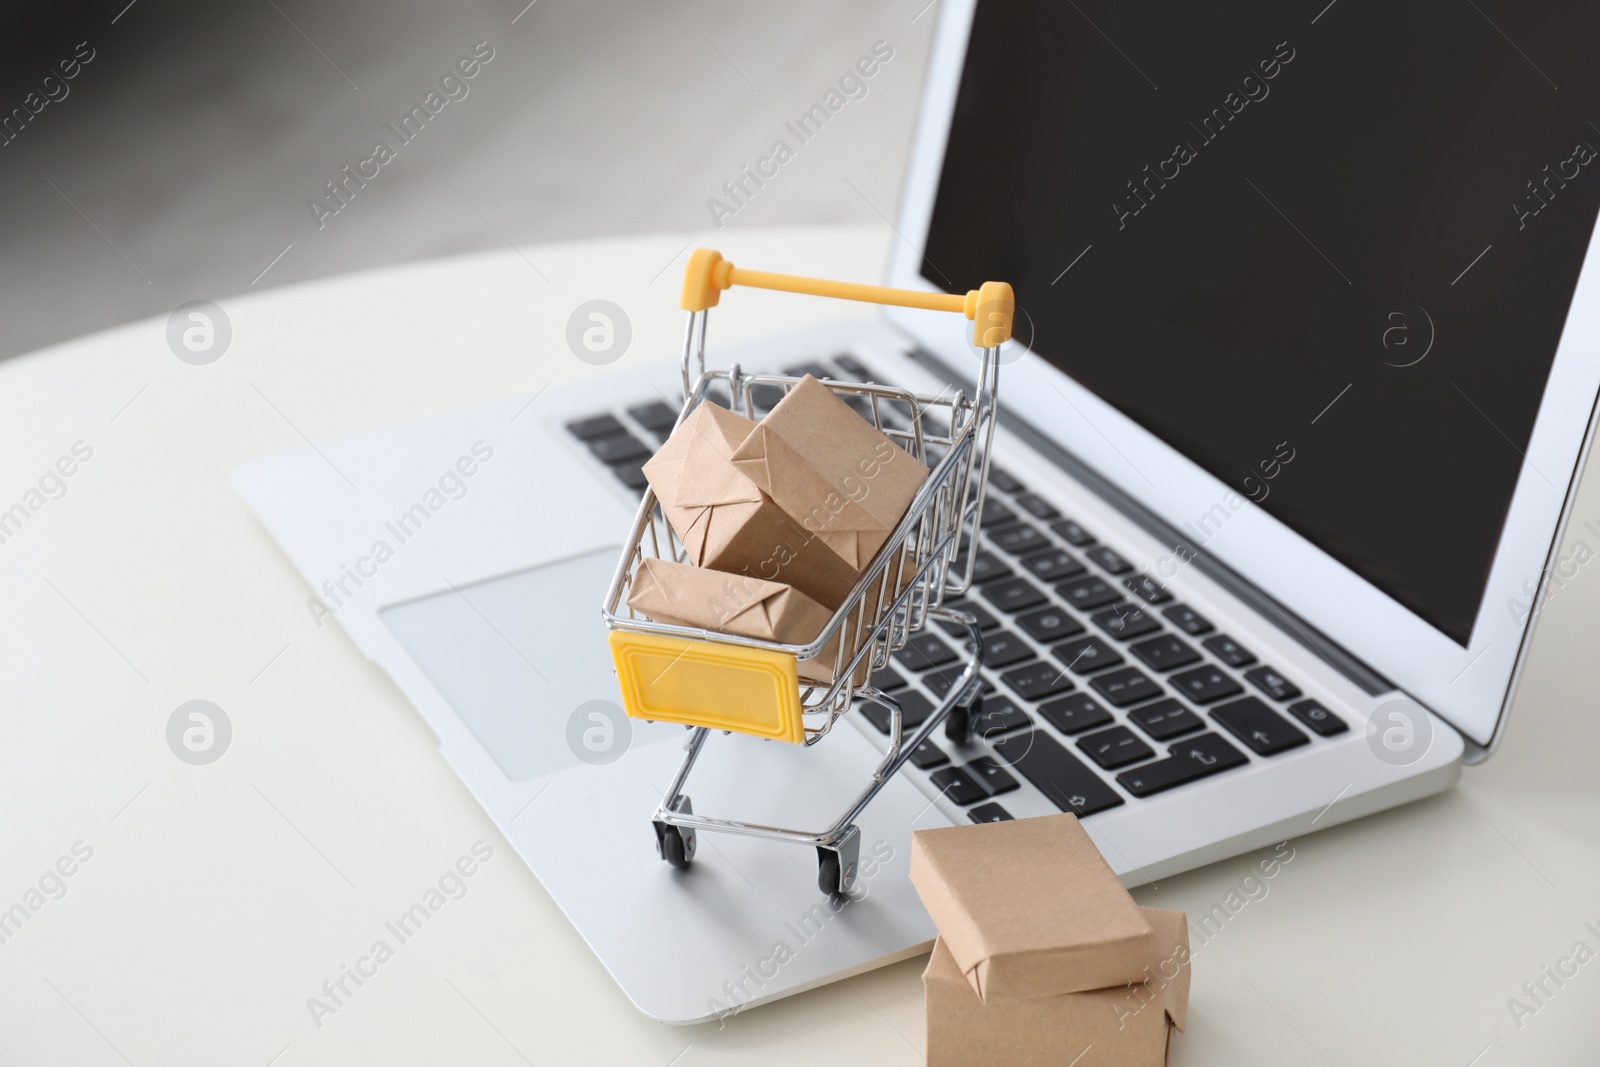 Photo of Internet shopping. Laptop and small cart with boxes on white table indoors